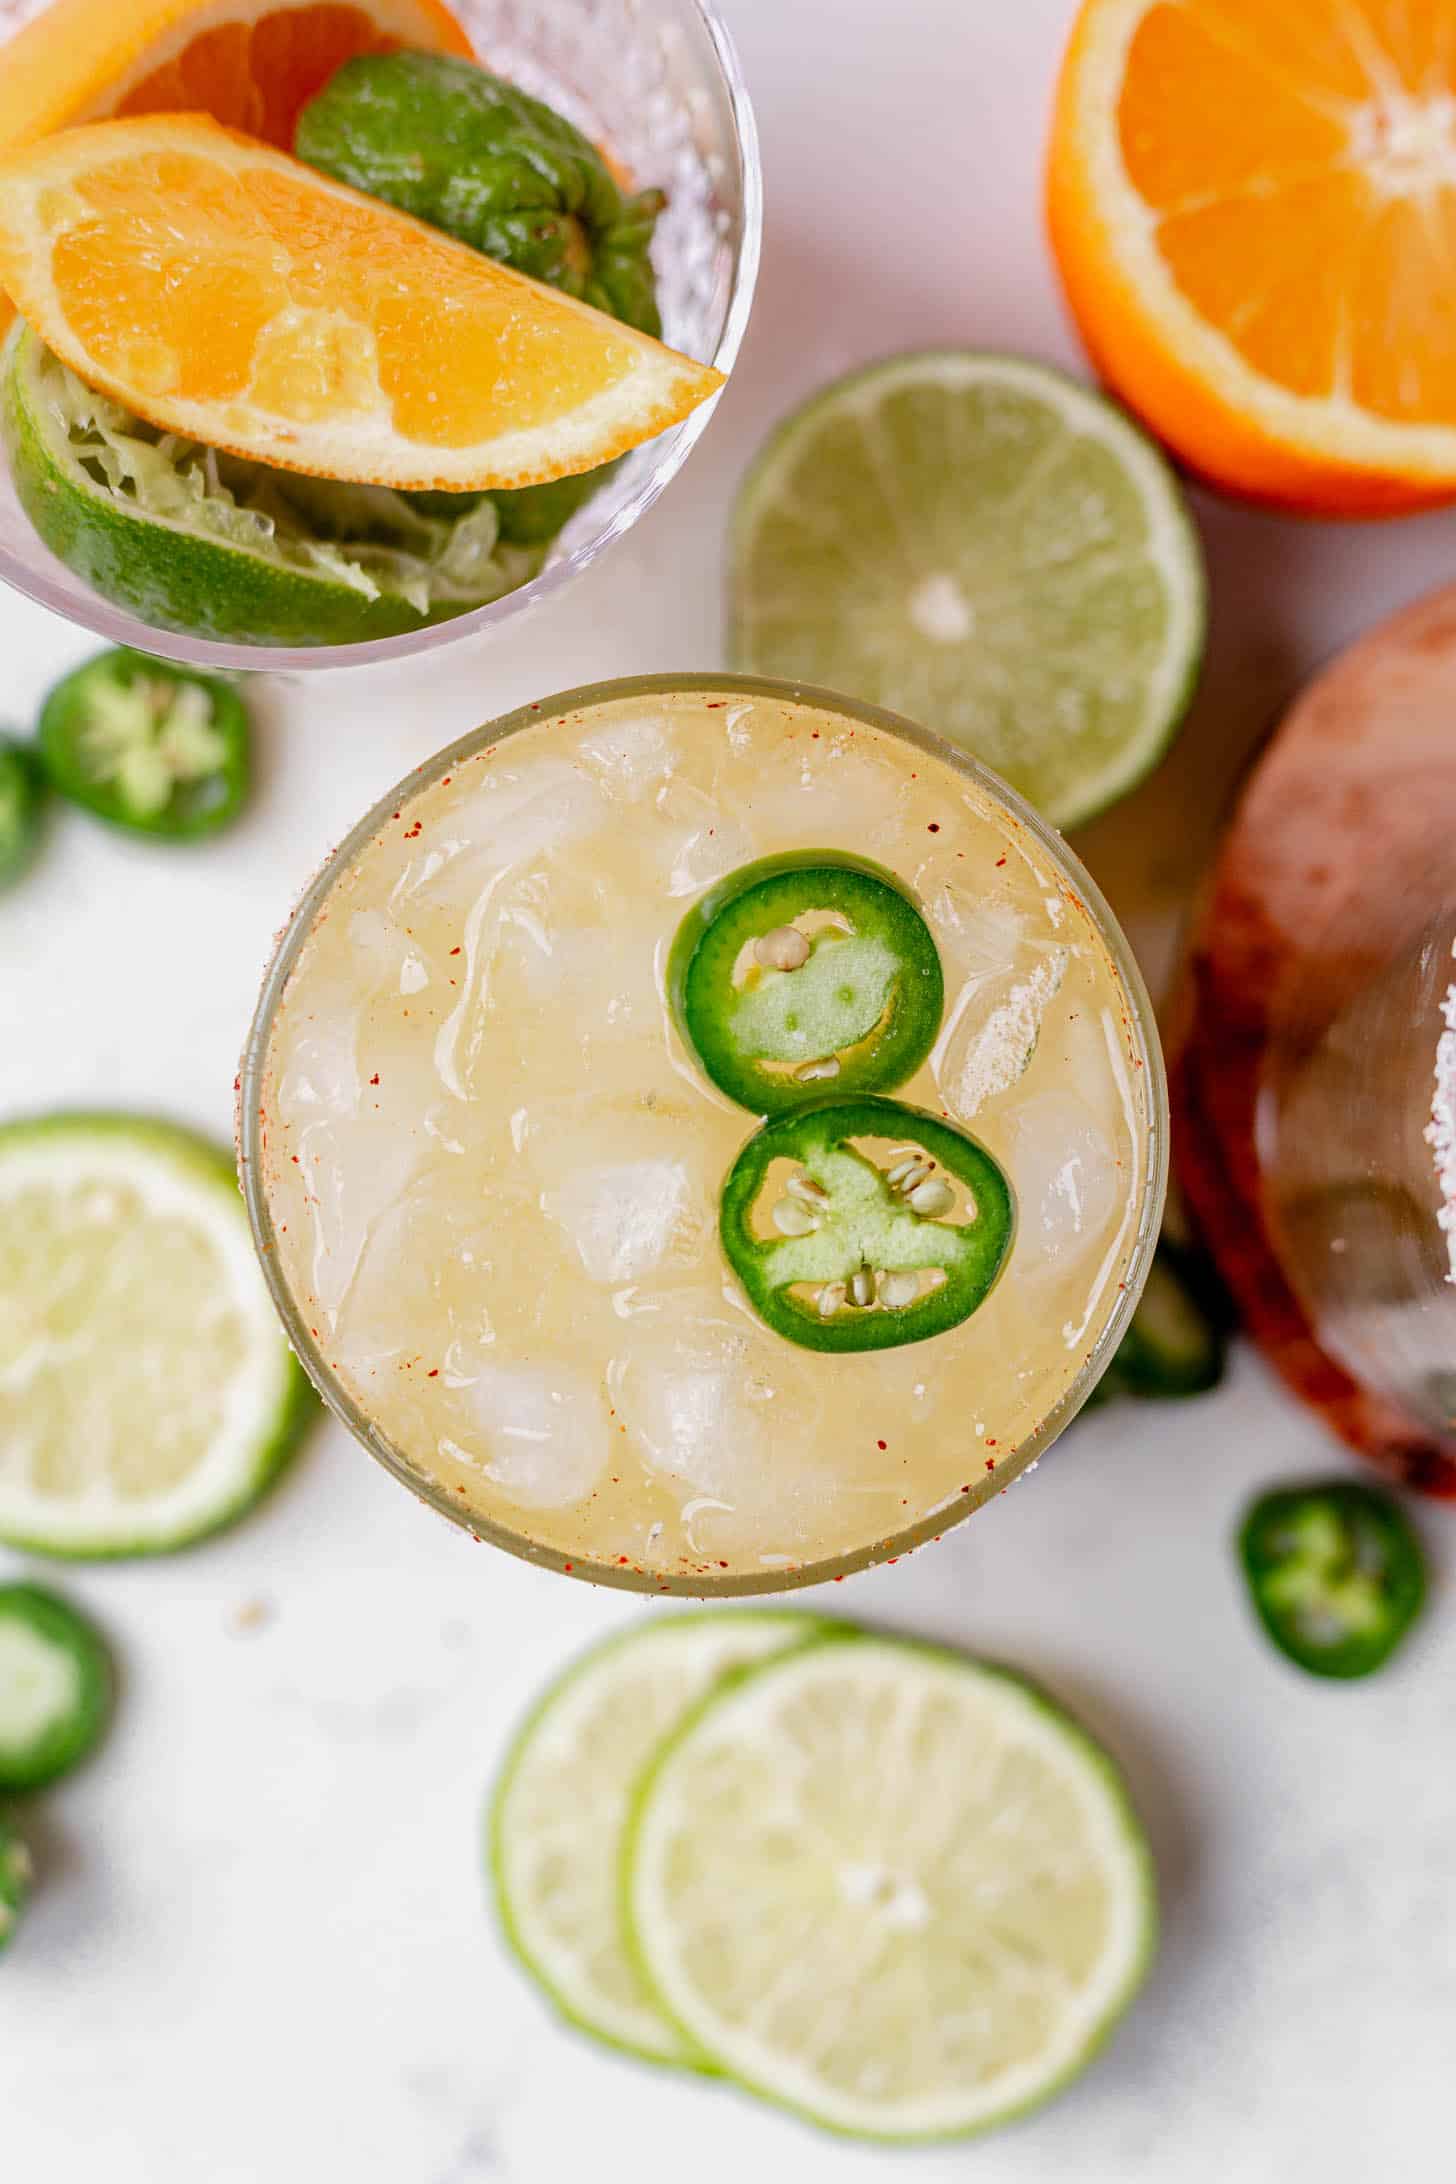 two jalapeno slices on top of a skiny spicy margarita